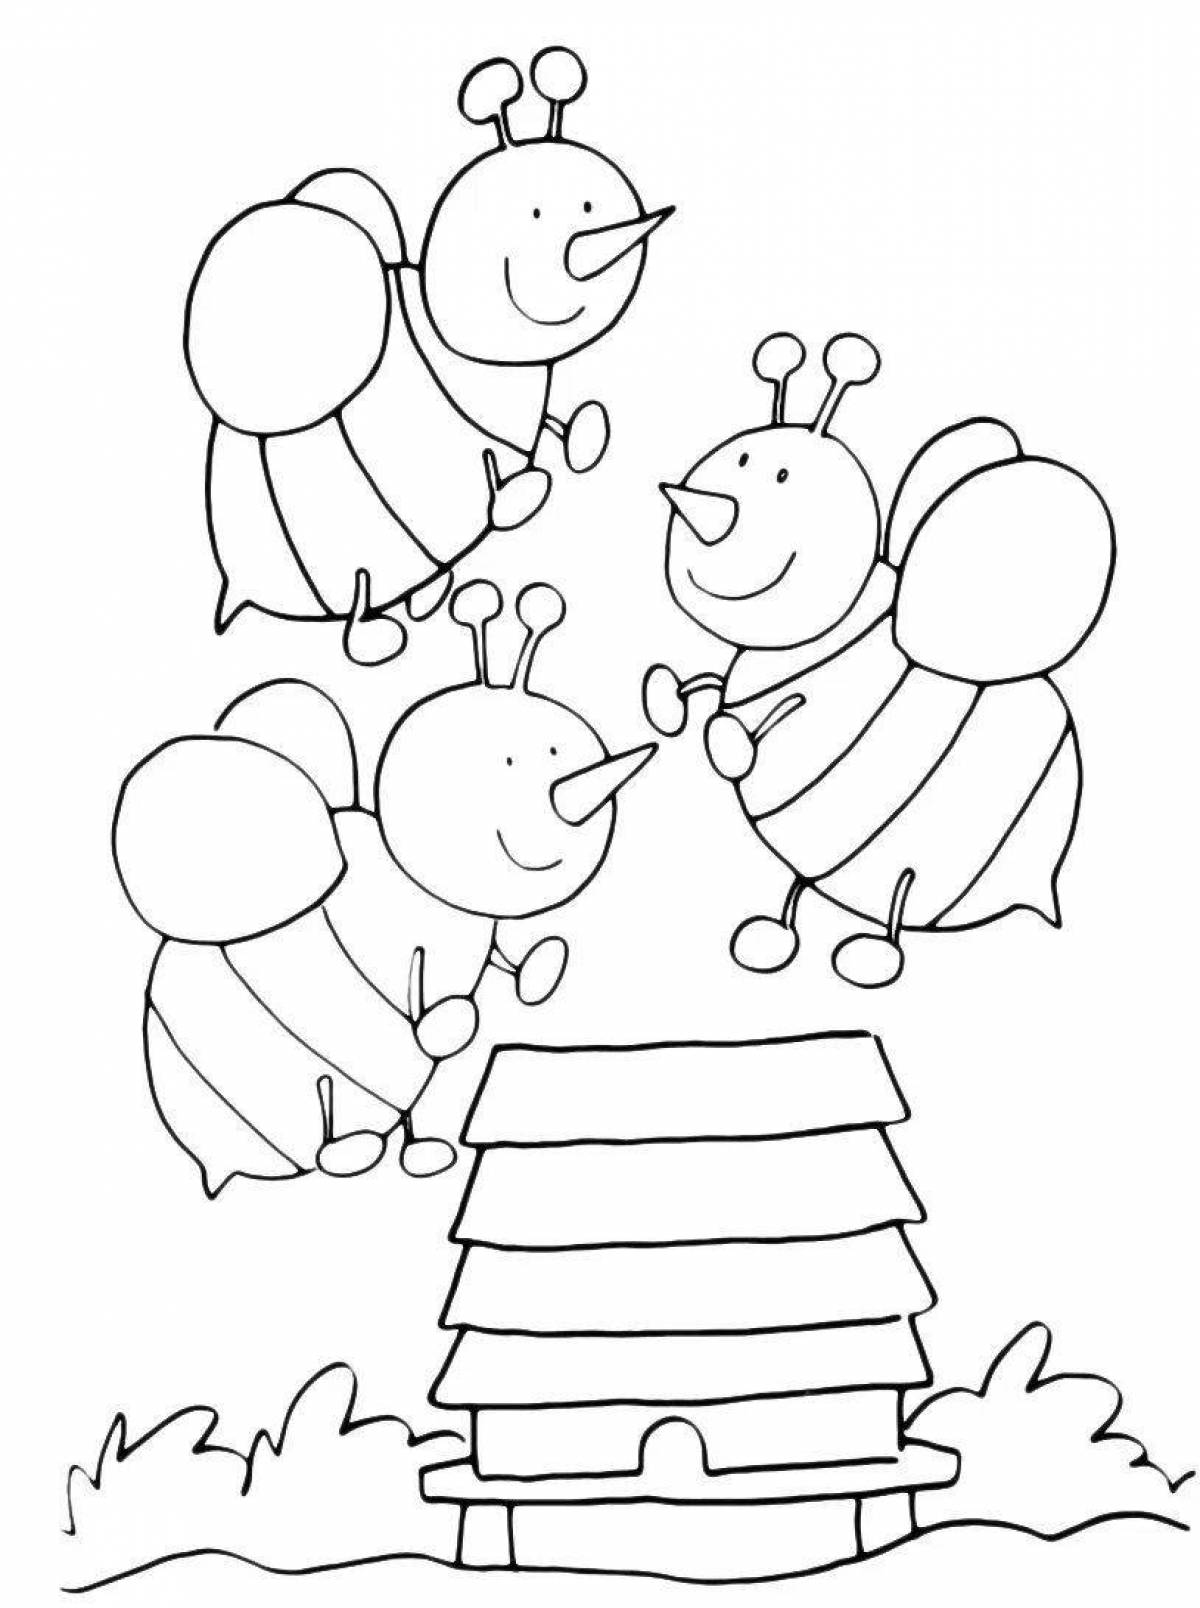 Bright beekeeper coloring book